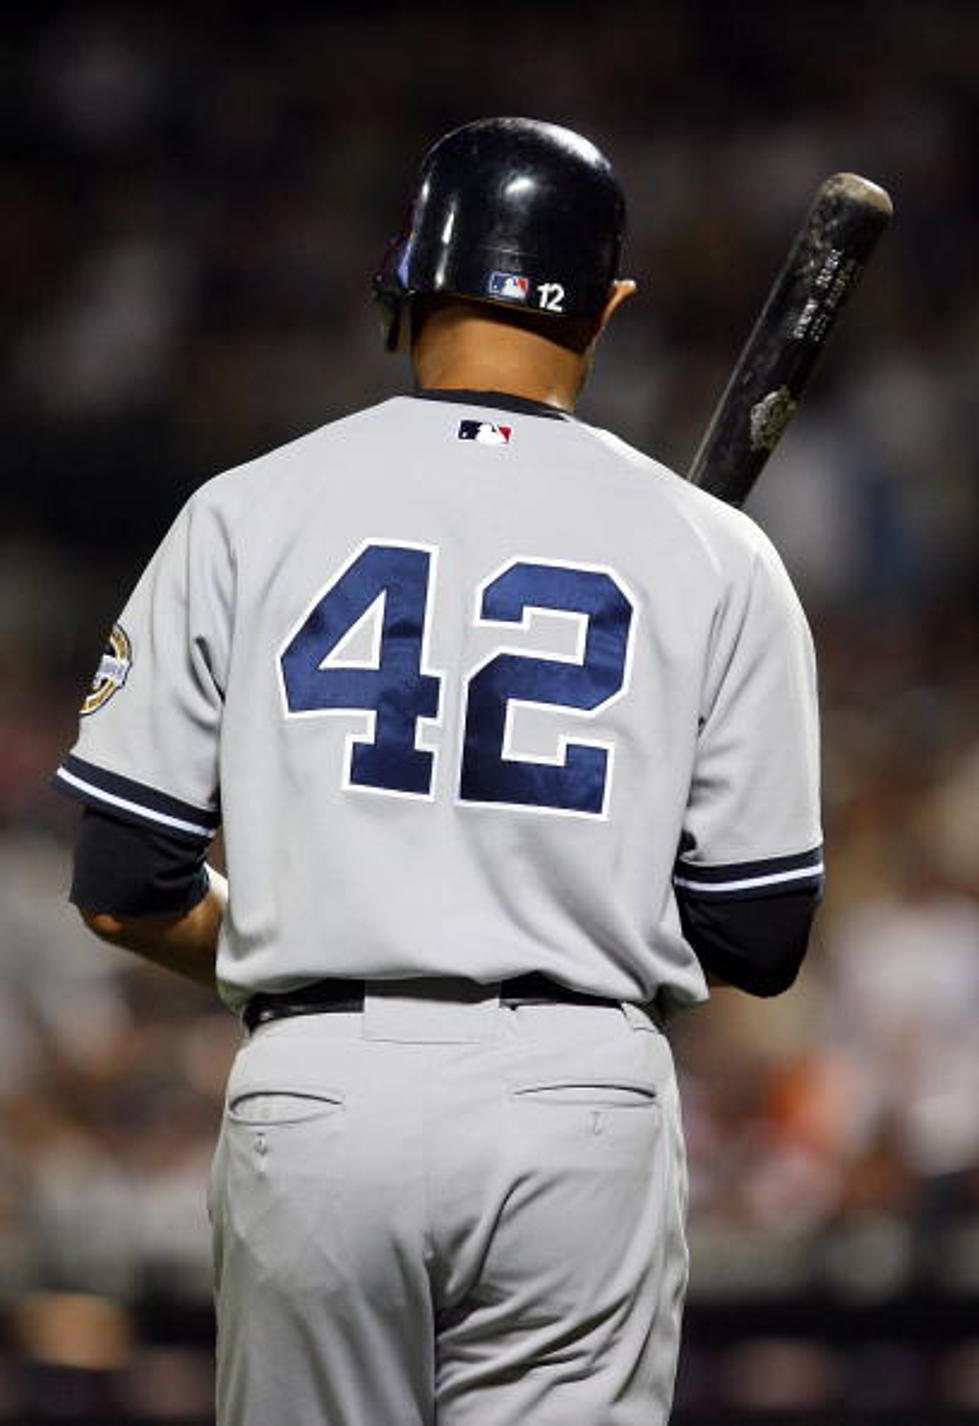 42 For 42: Mariano Rivera's 41st Greatest Moment – Mo's First And Only RBI